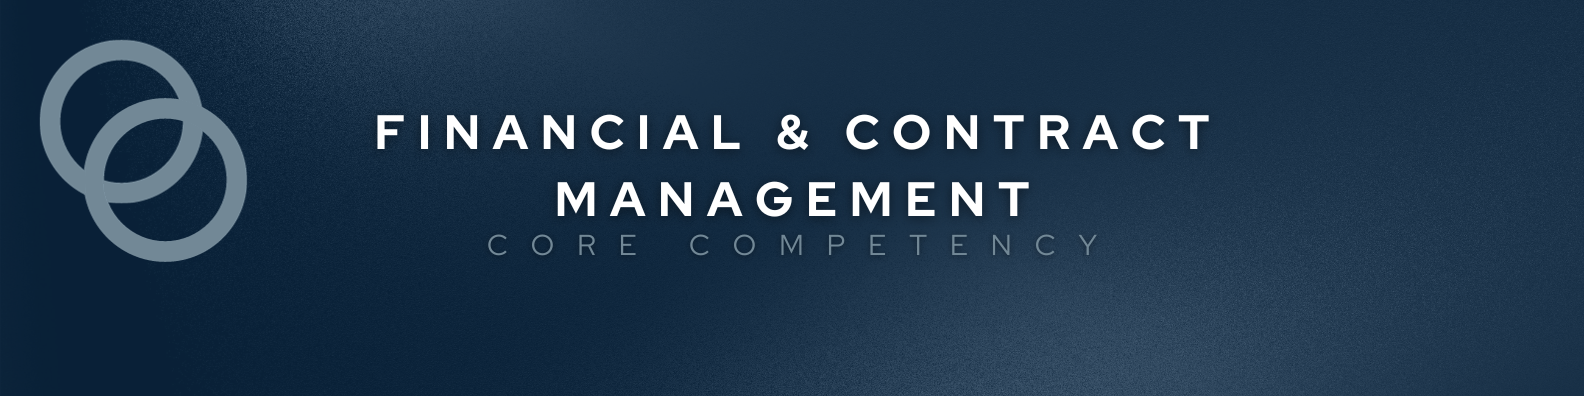 Financial & Contract Management